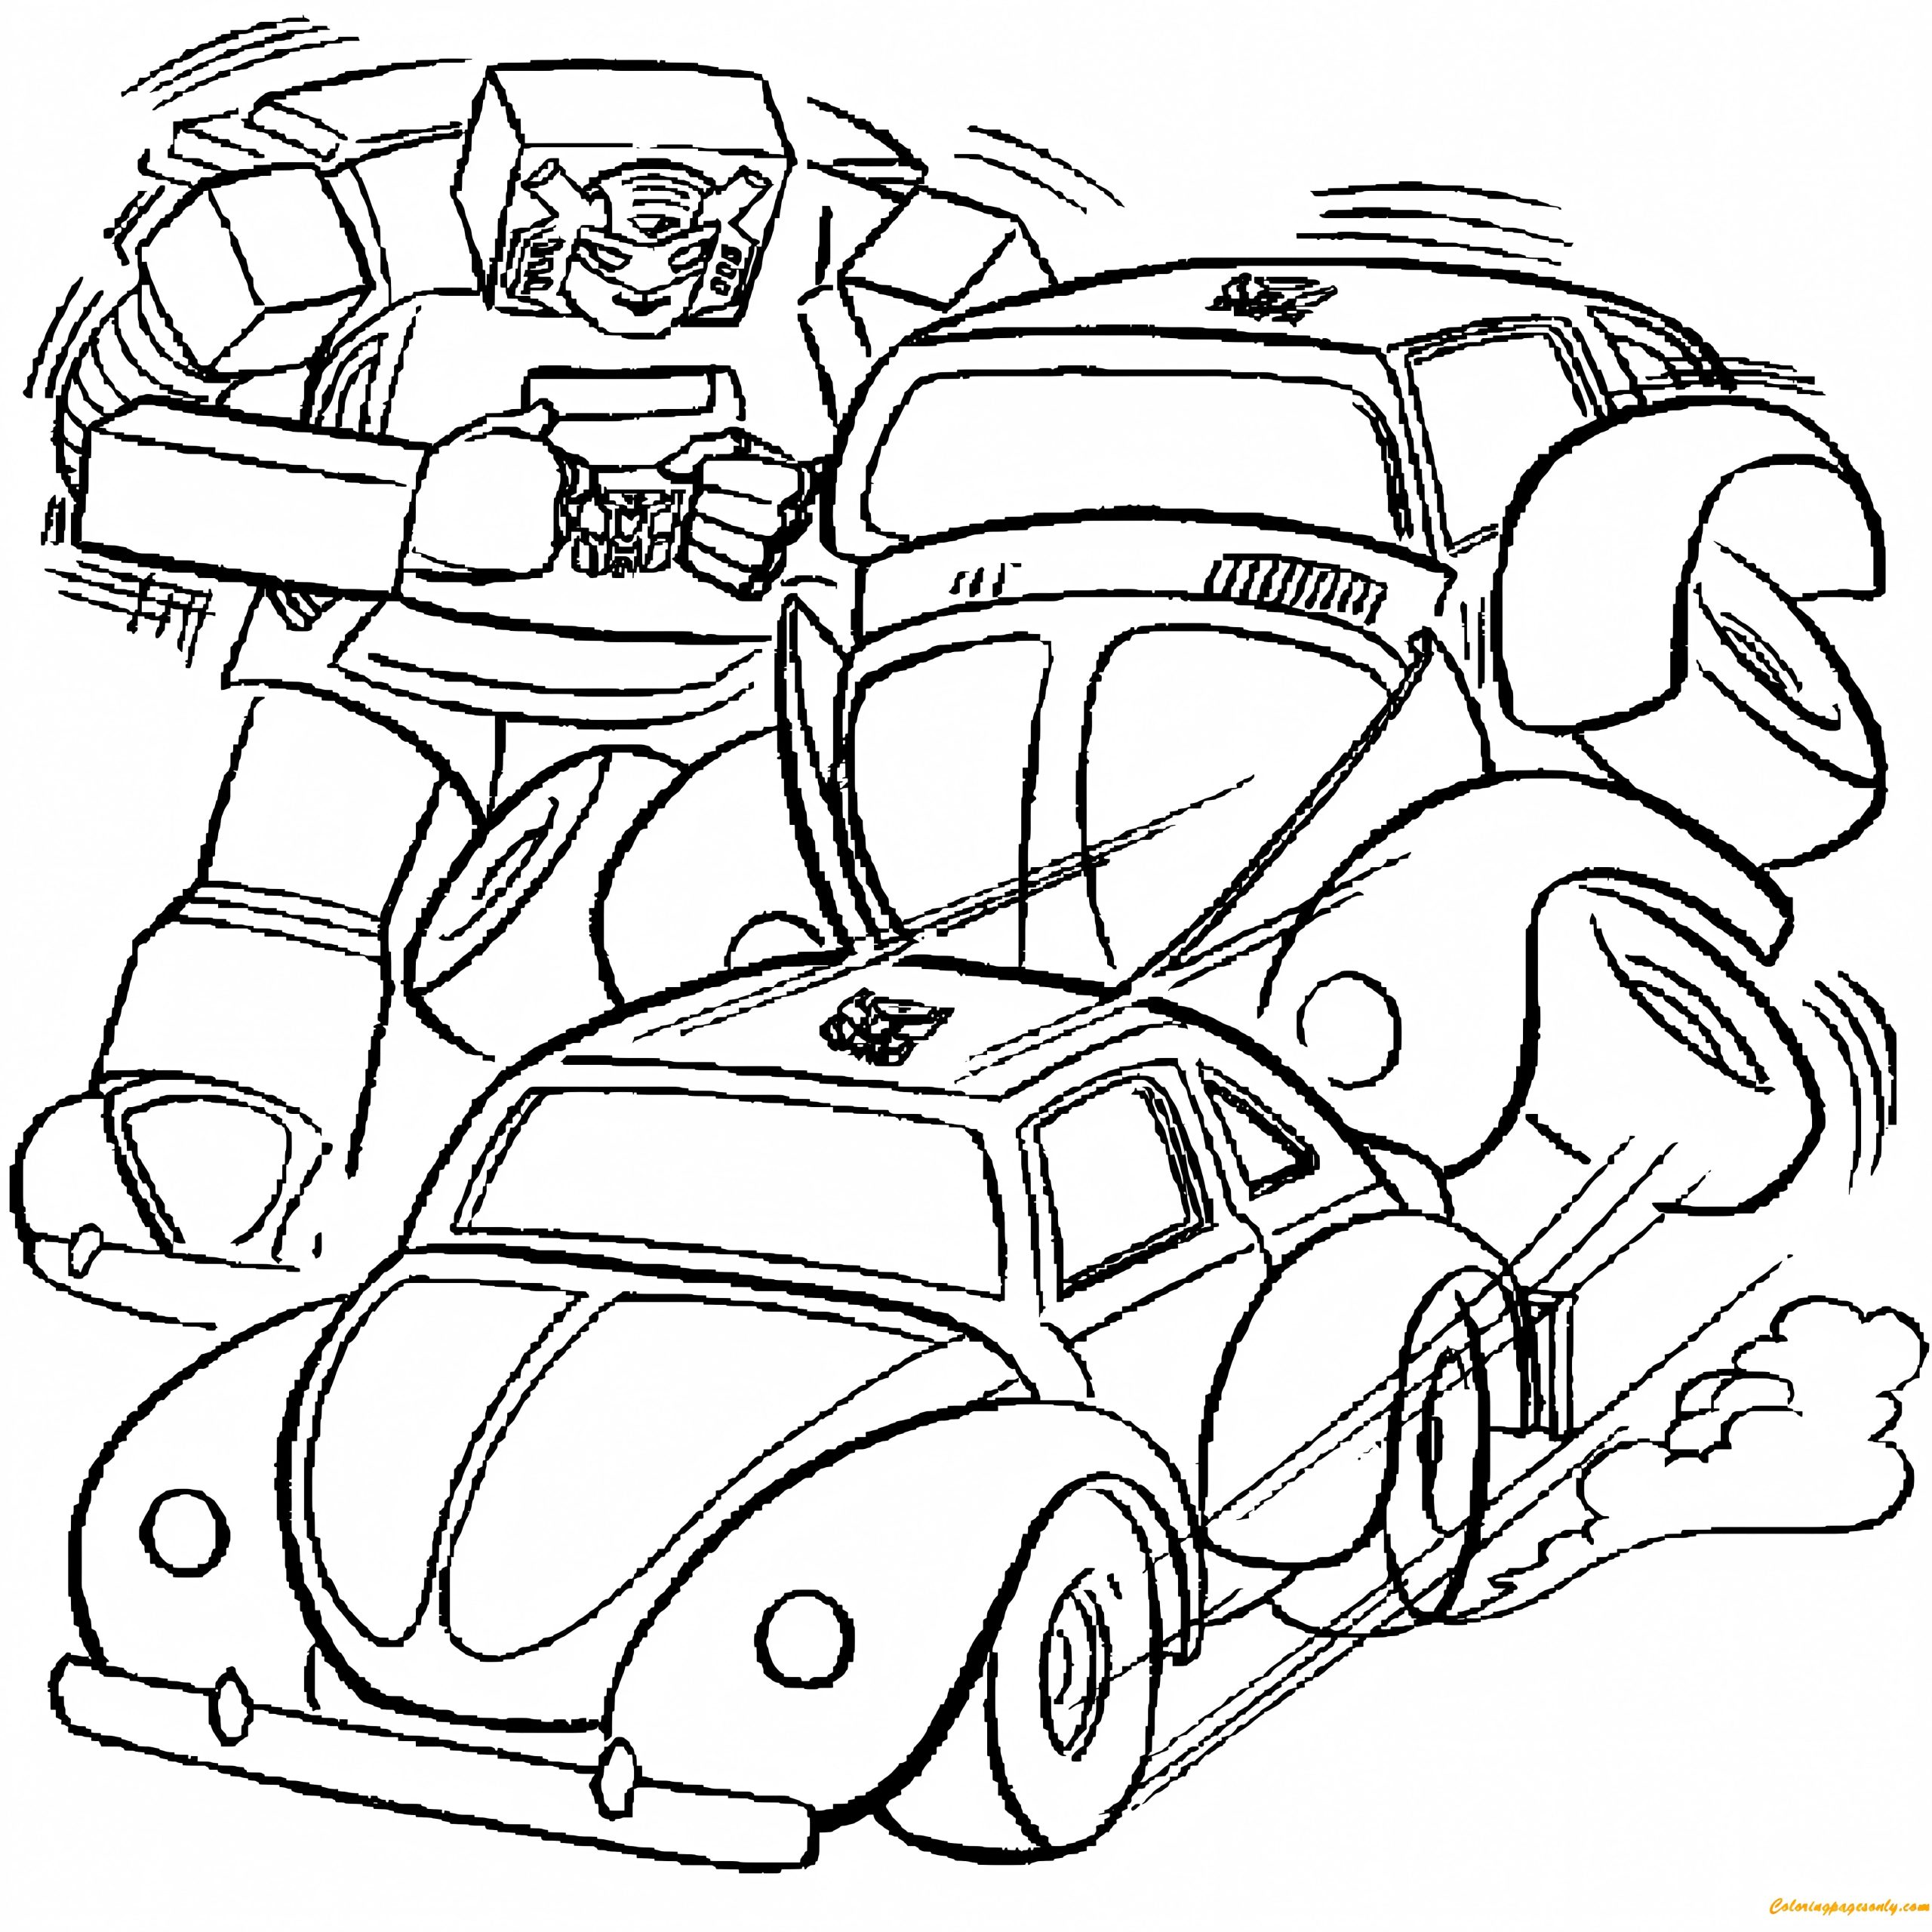 Transformers Breaking Cars Coloring Page